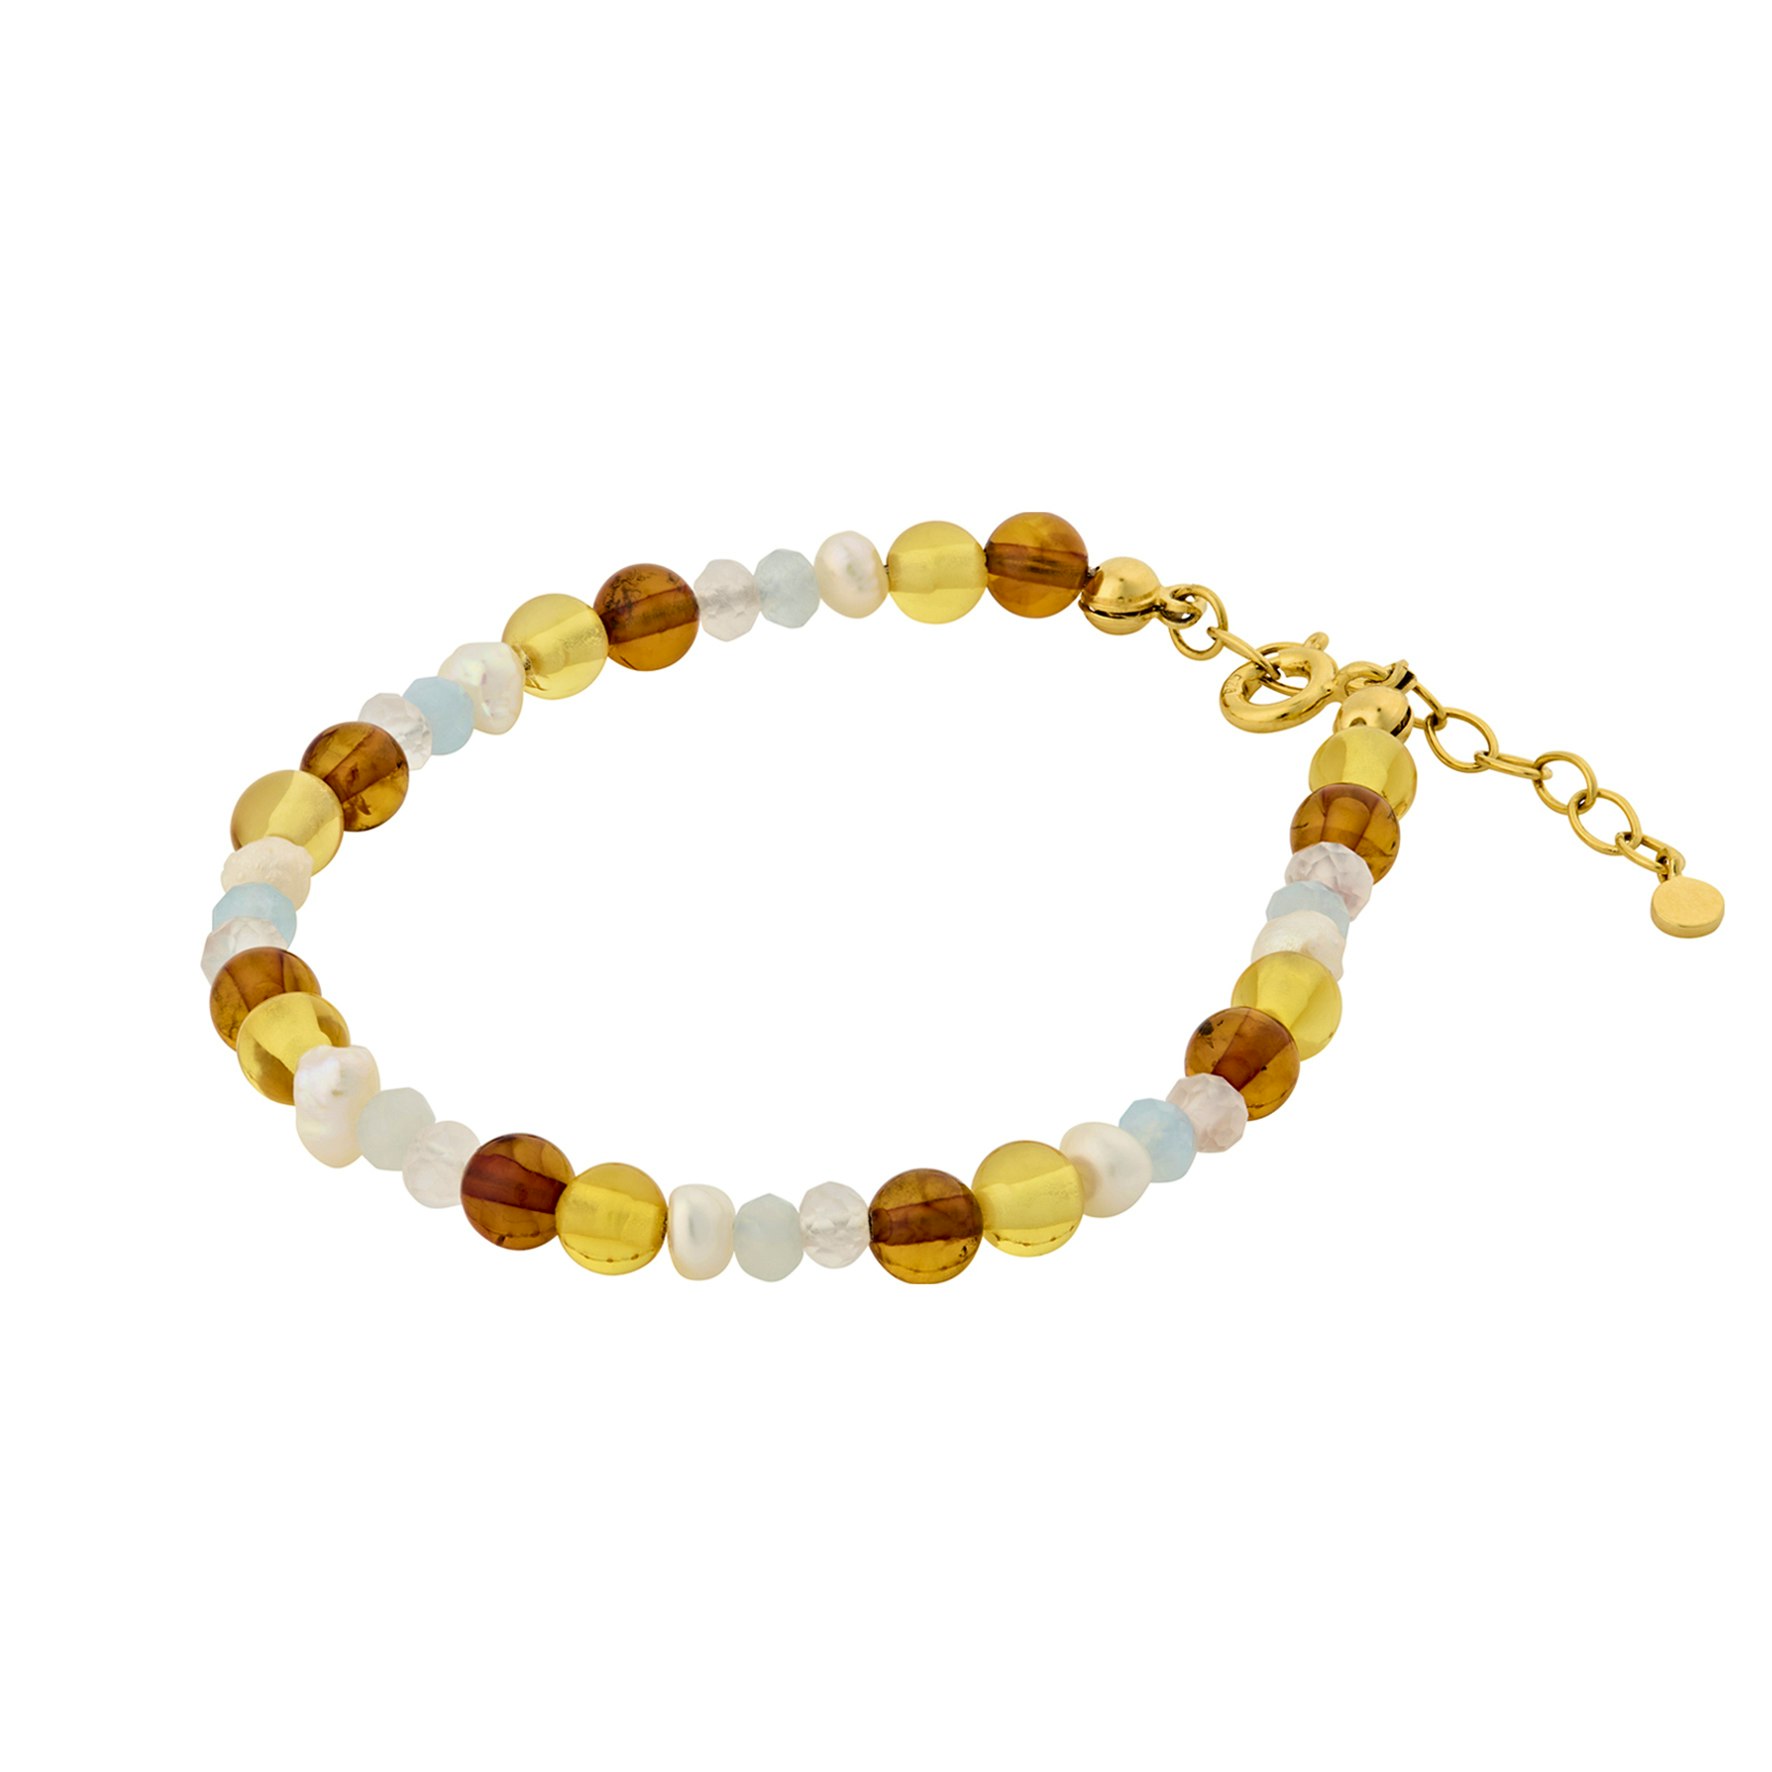 Amber Glow Bracelet from Pernille Corydon in Goldplated-Silver Sterling 925